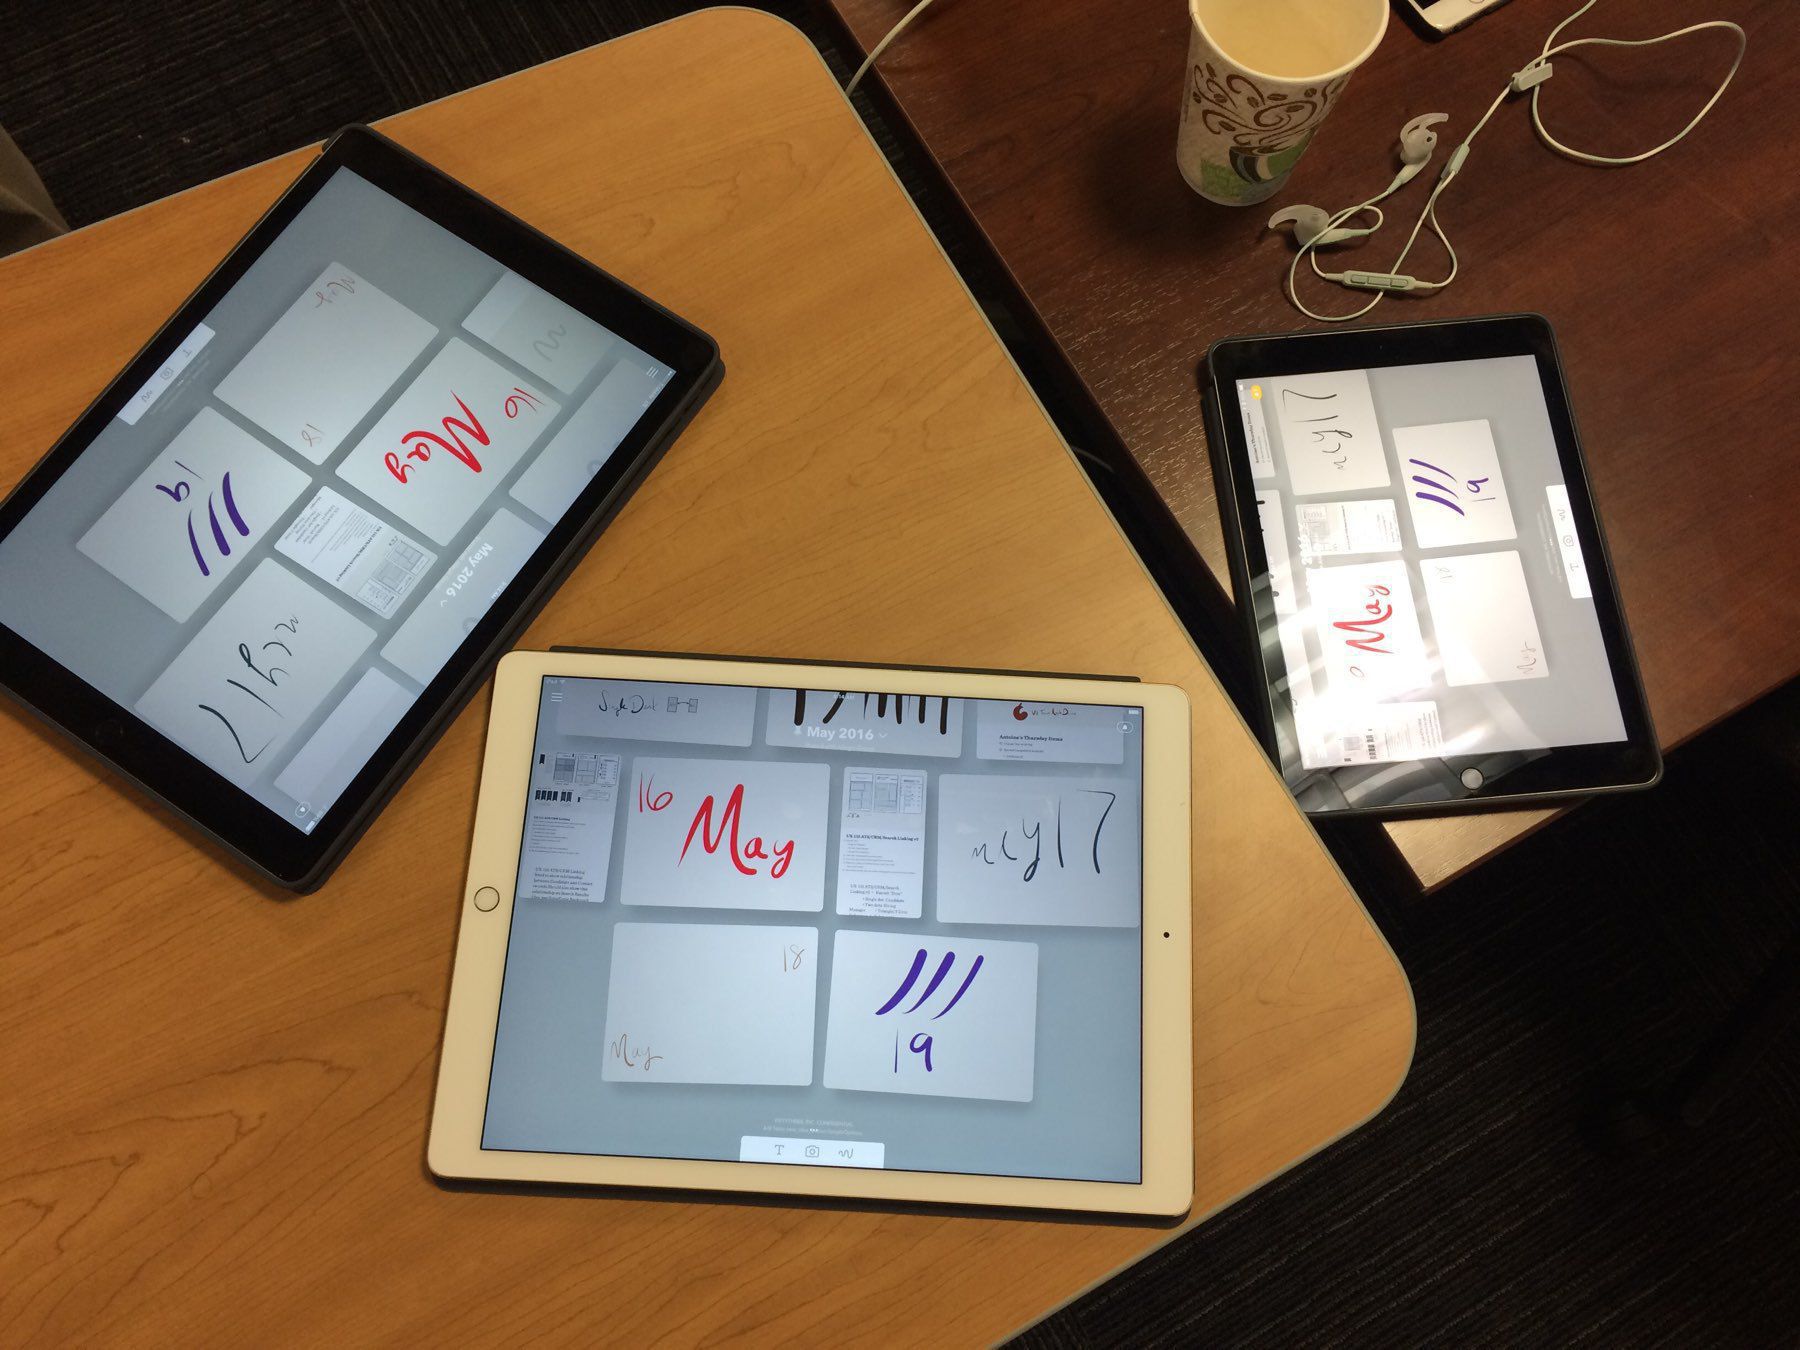 3 iPad devices in an experience design review session